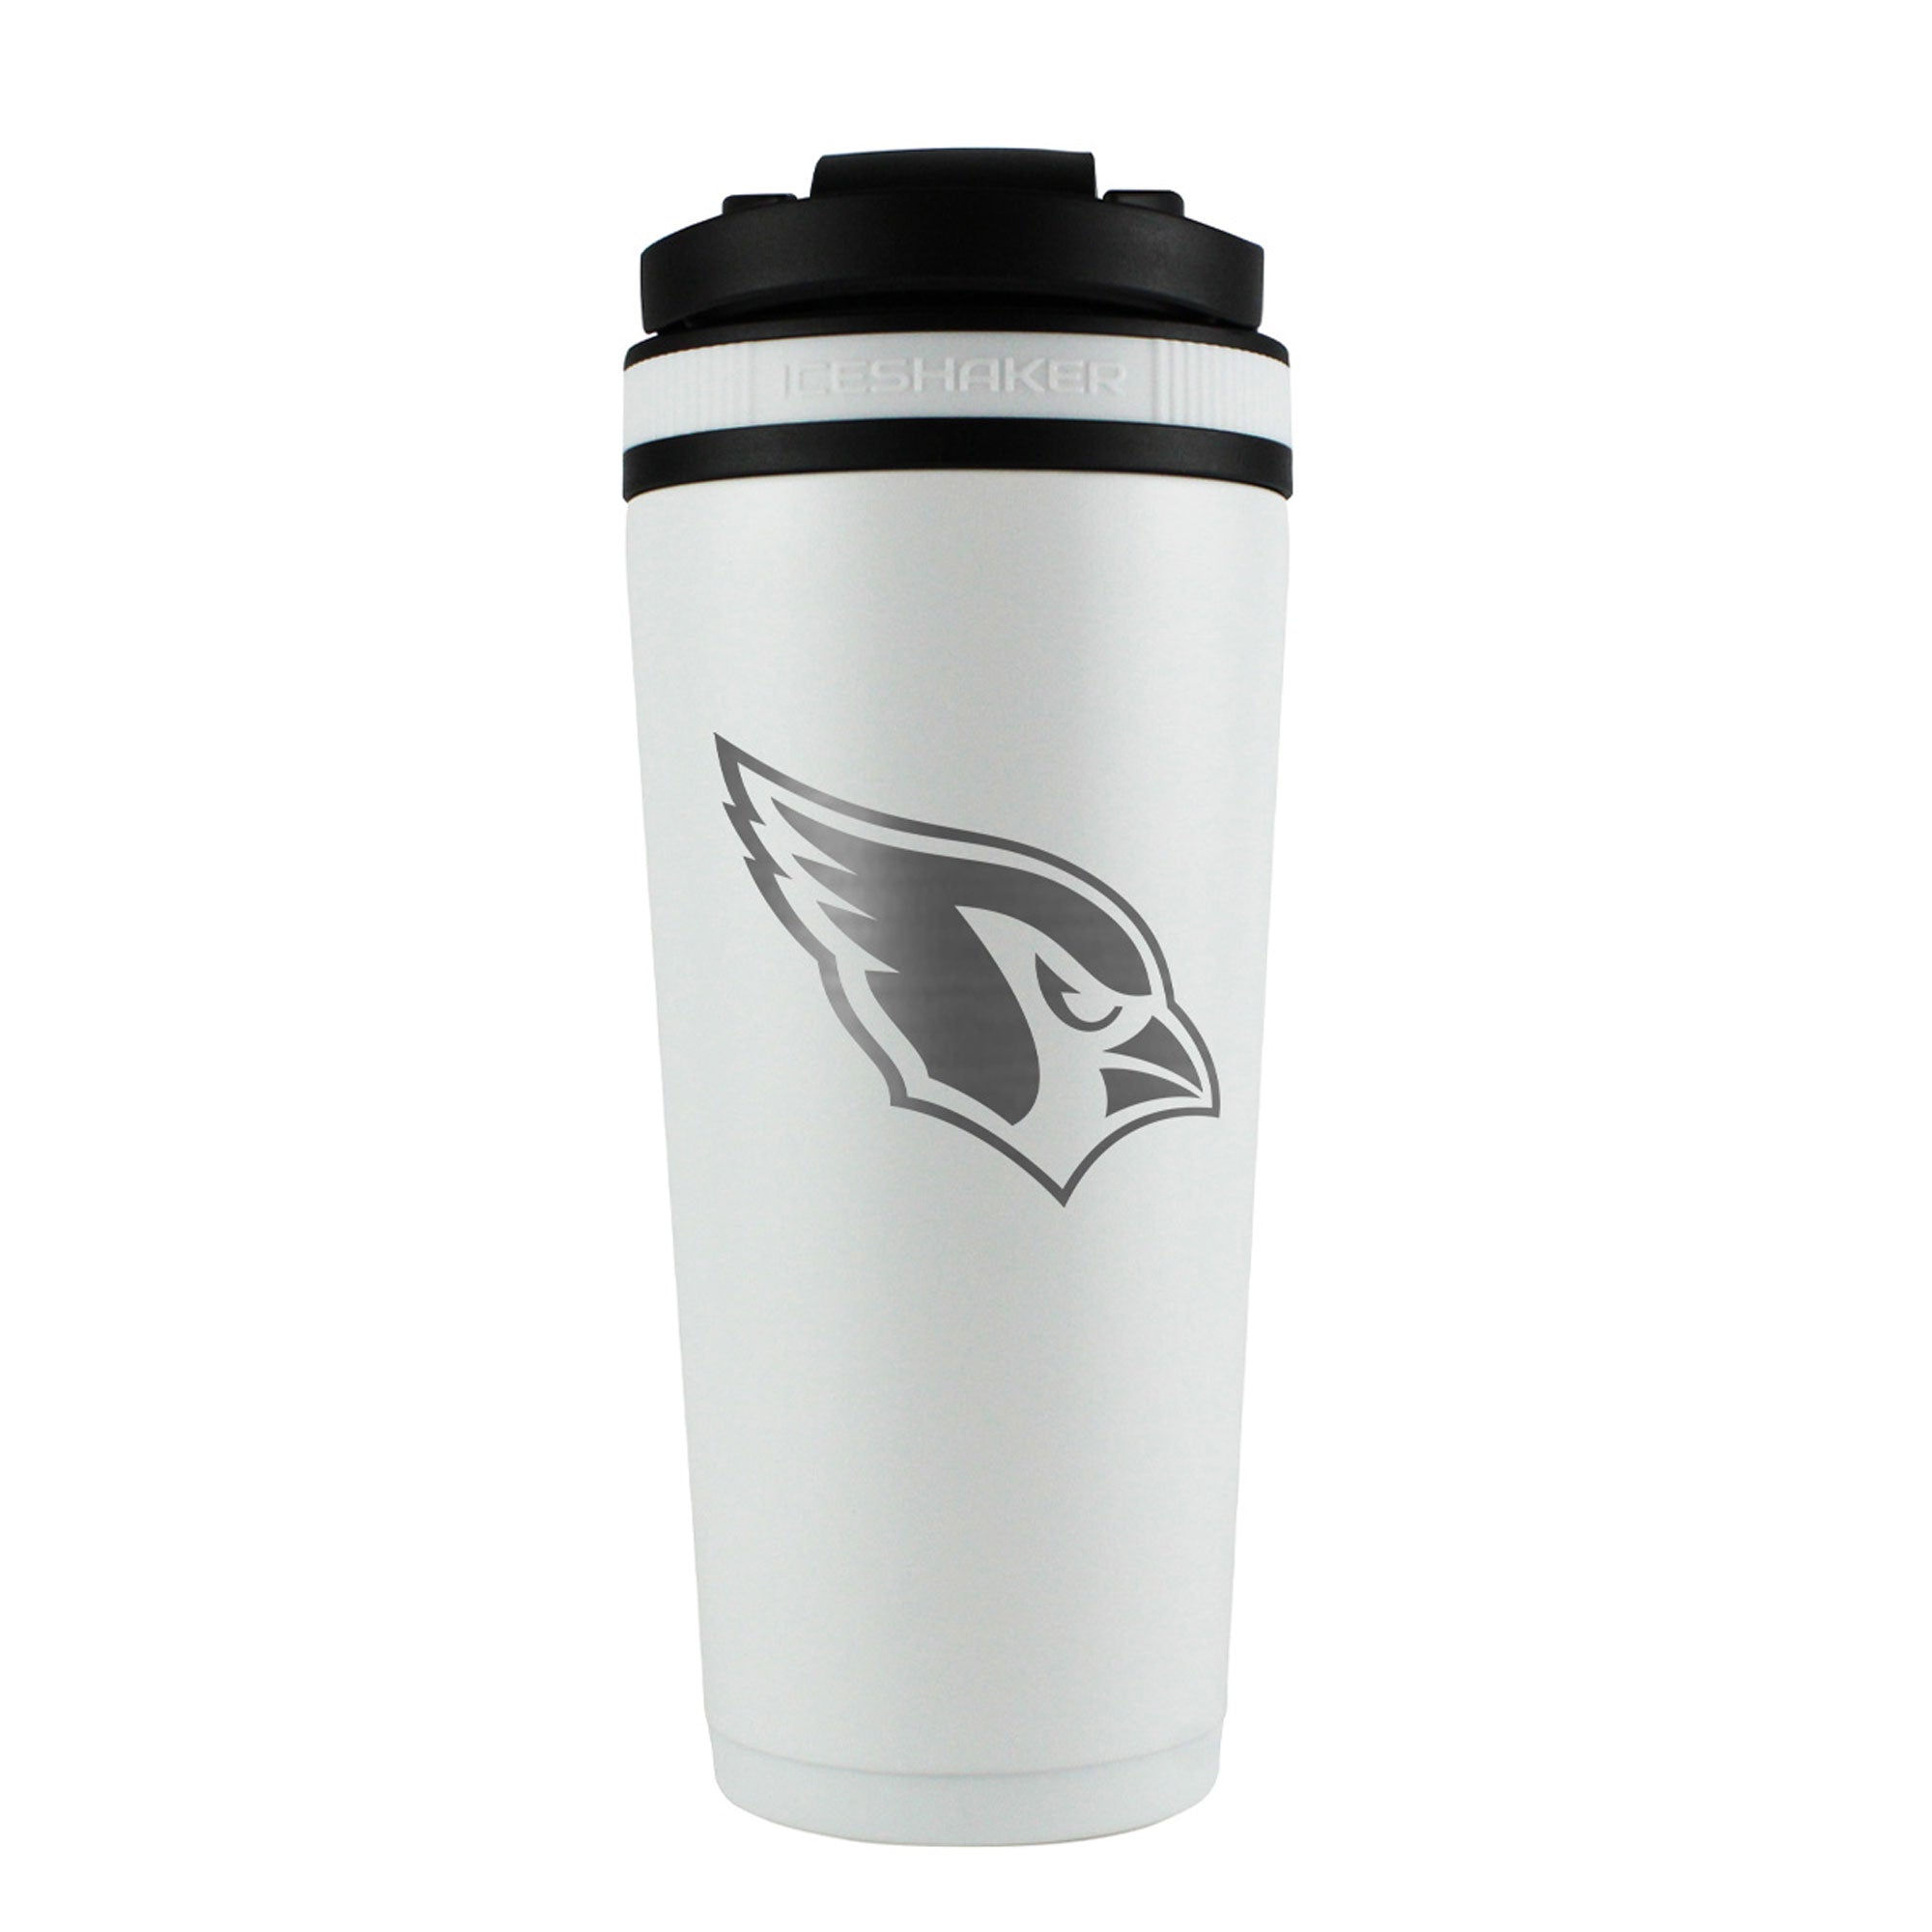 Officially Licensed Arizona Cardinals 26oz Ice Shaker - White